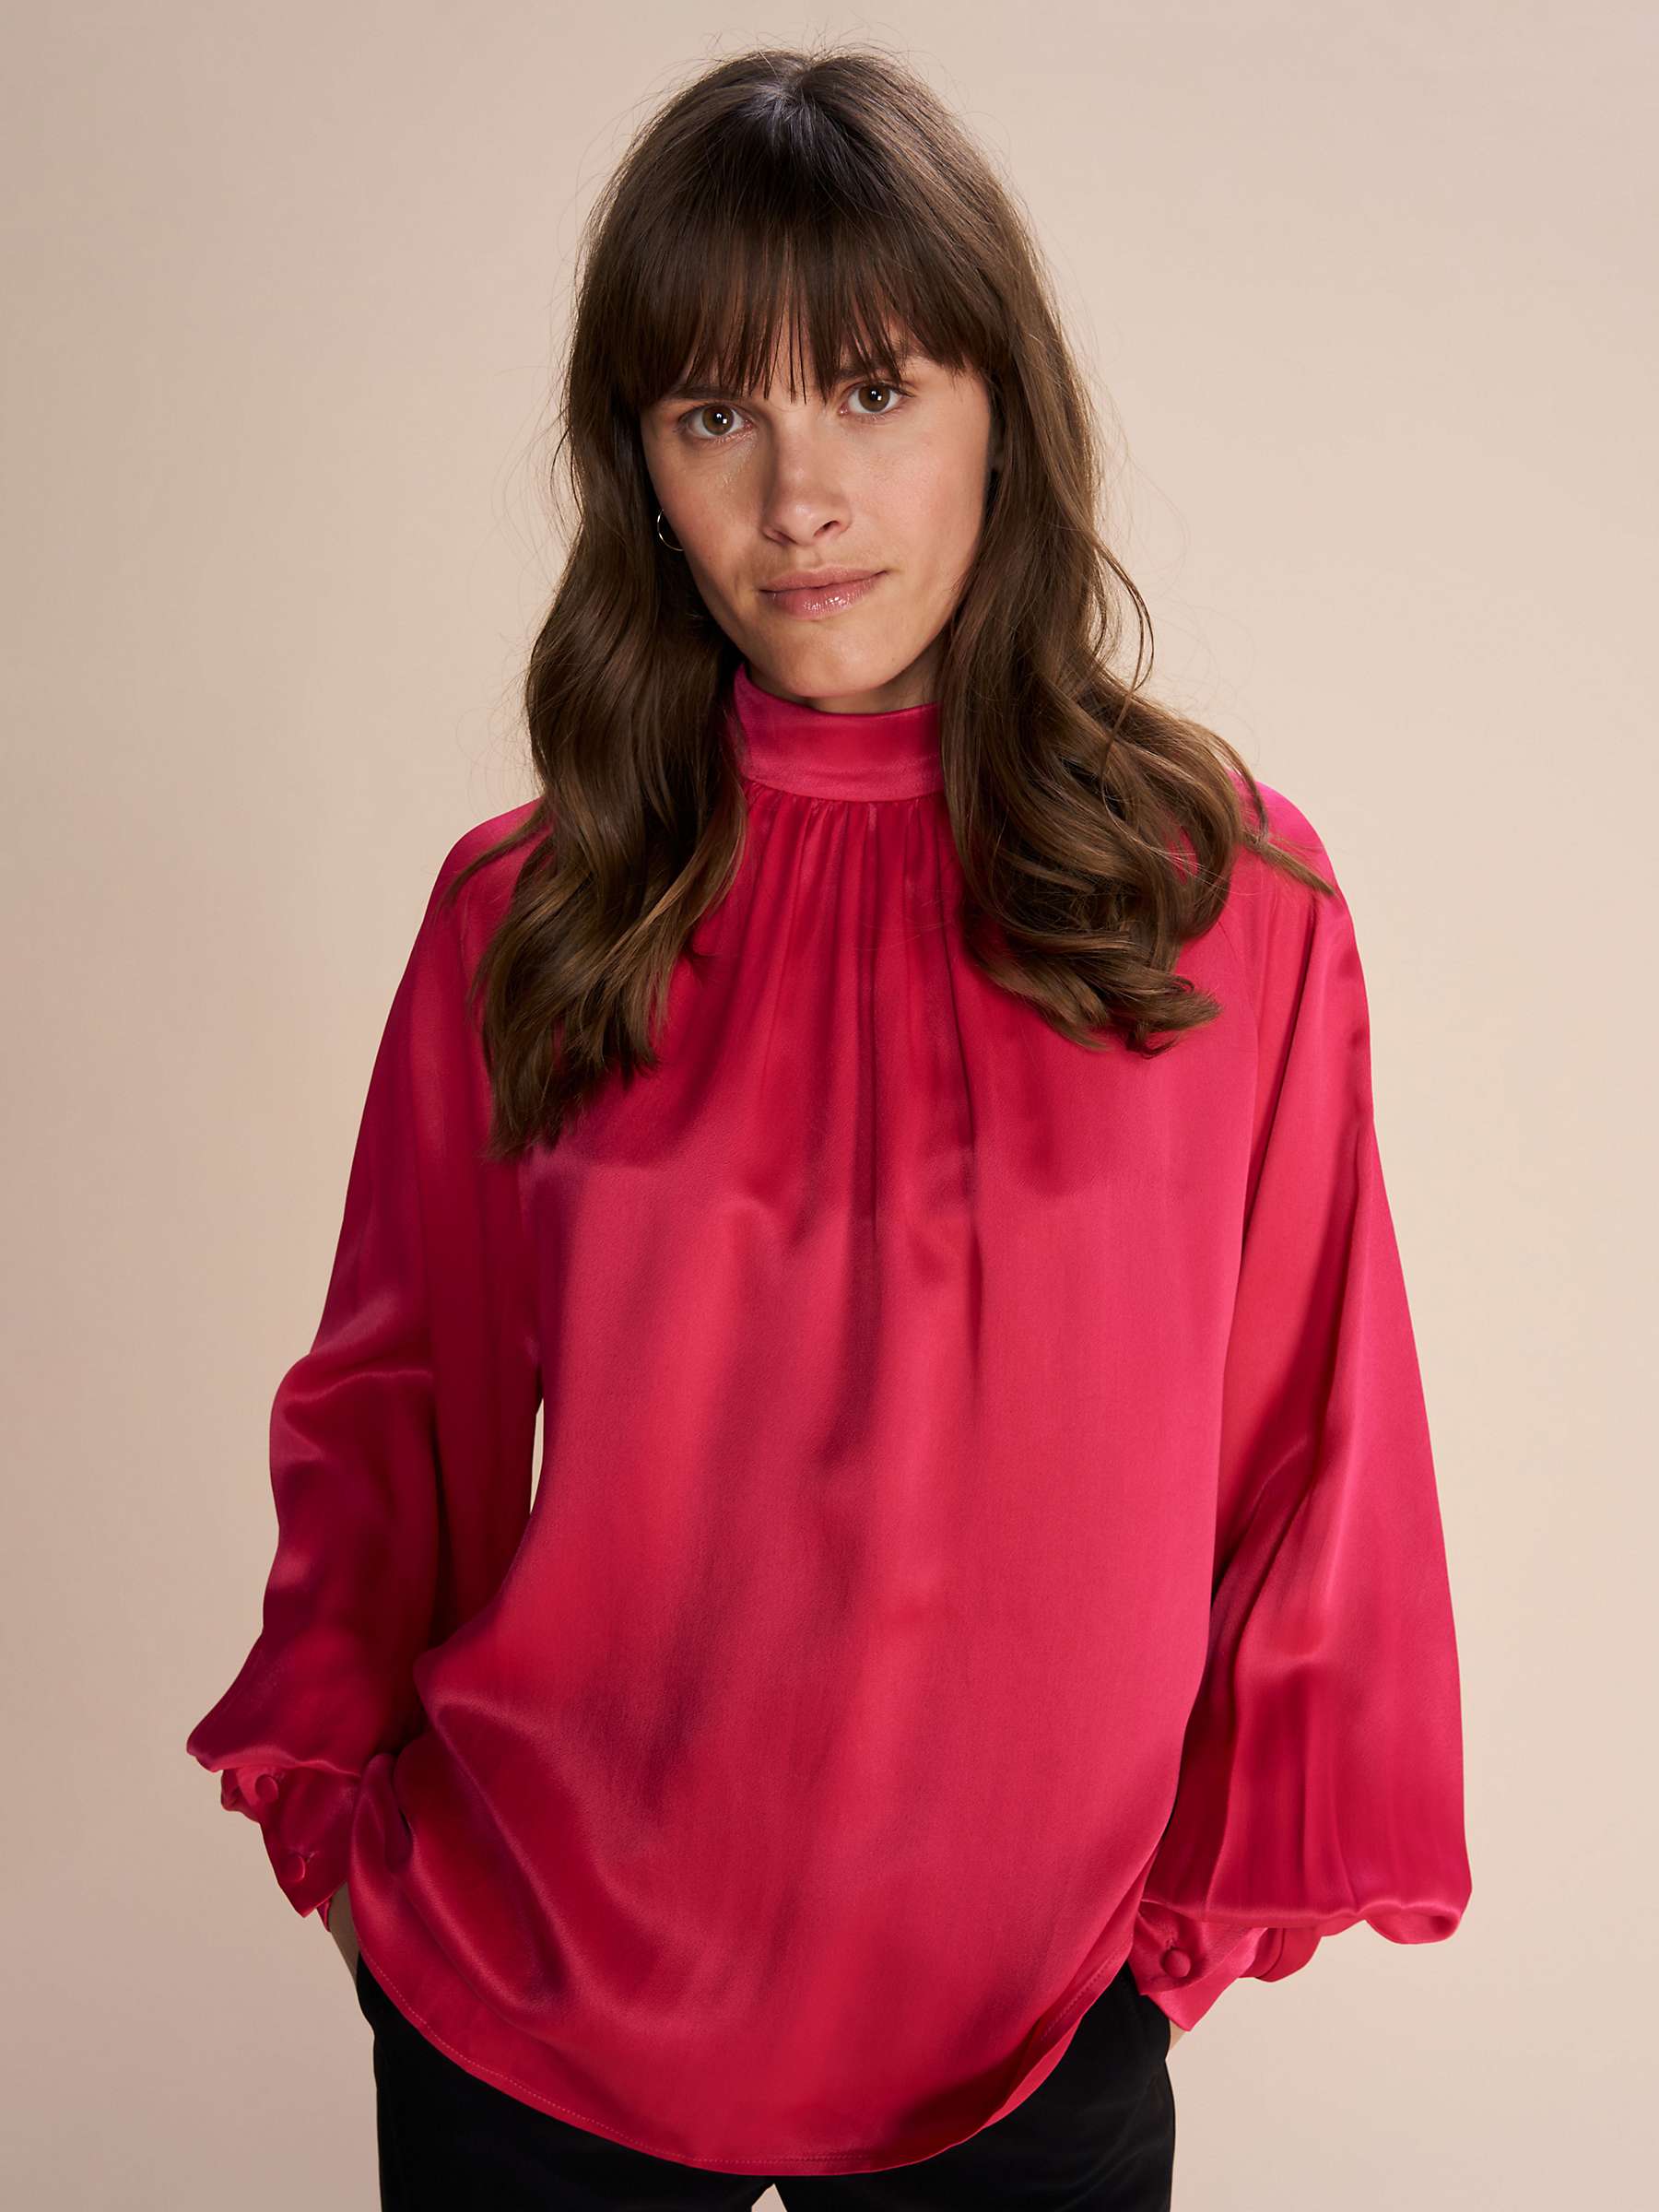 Buy MOS MOSH Sille Glossy Blouse, Bright Rose Online at johnlewis.com